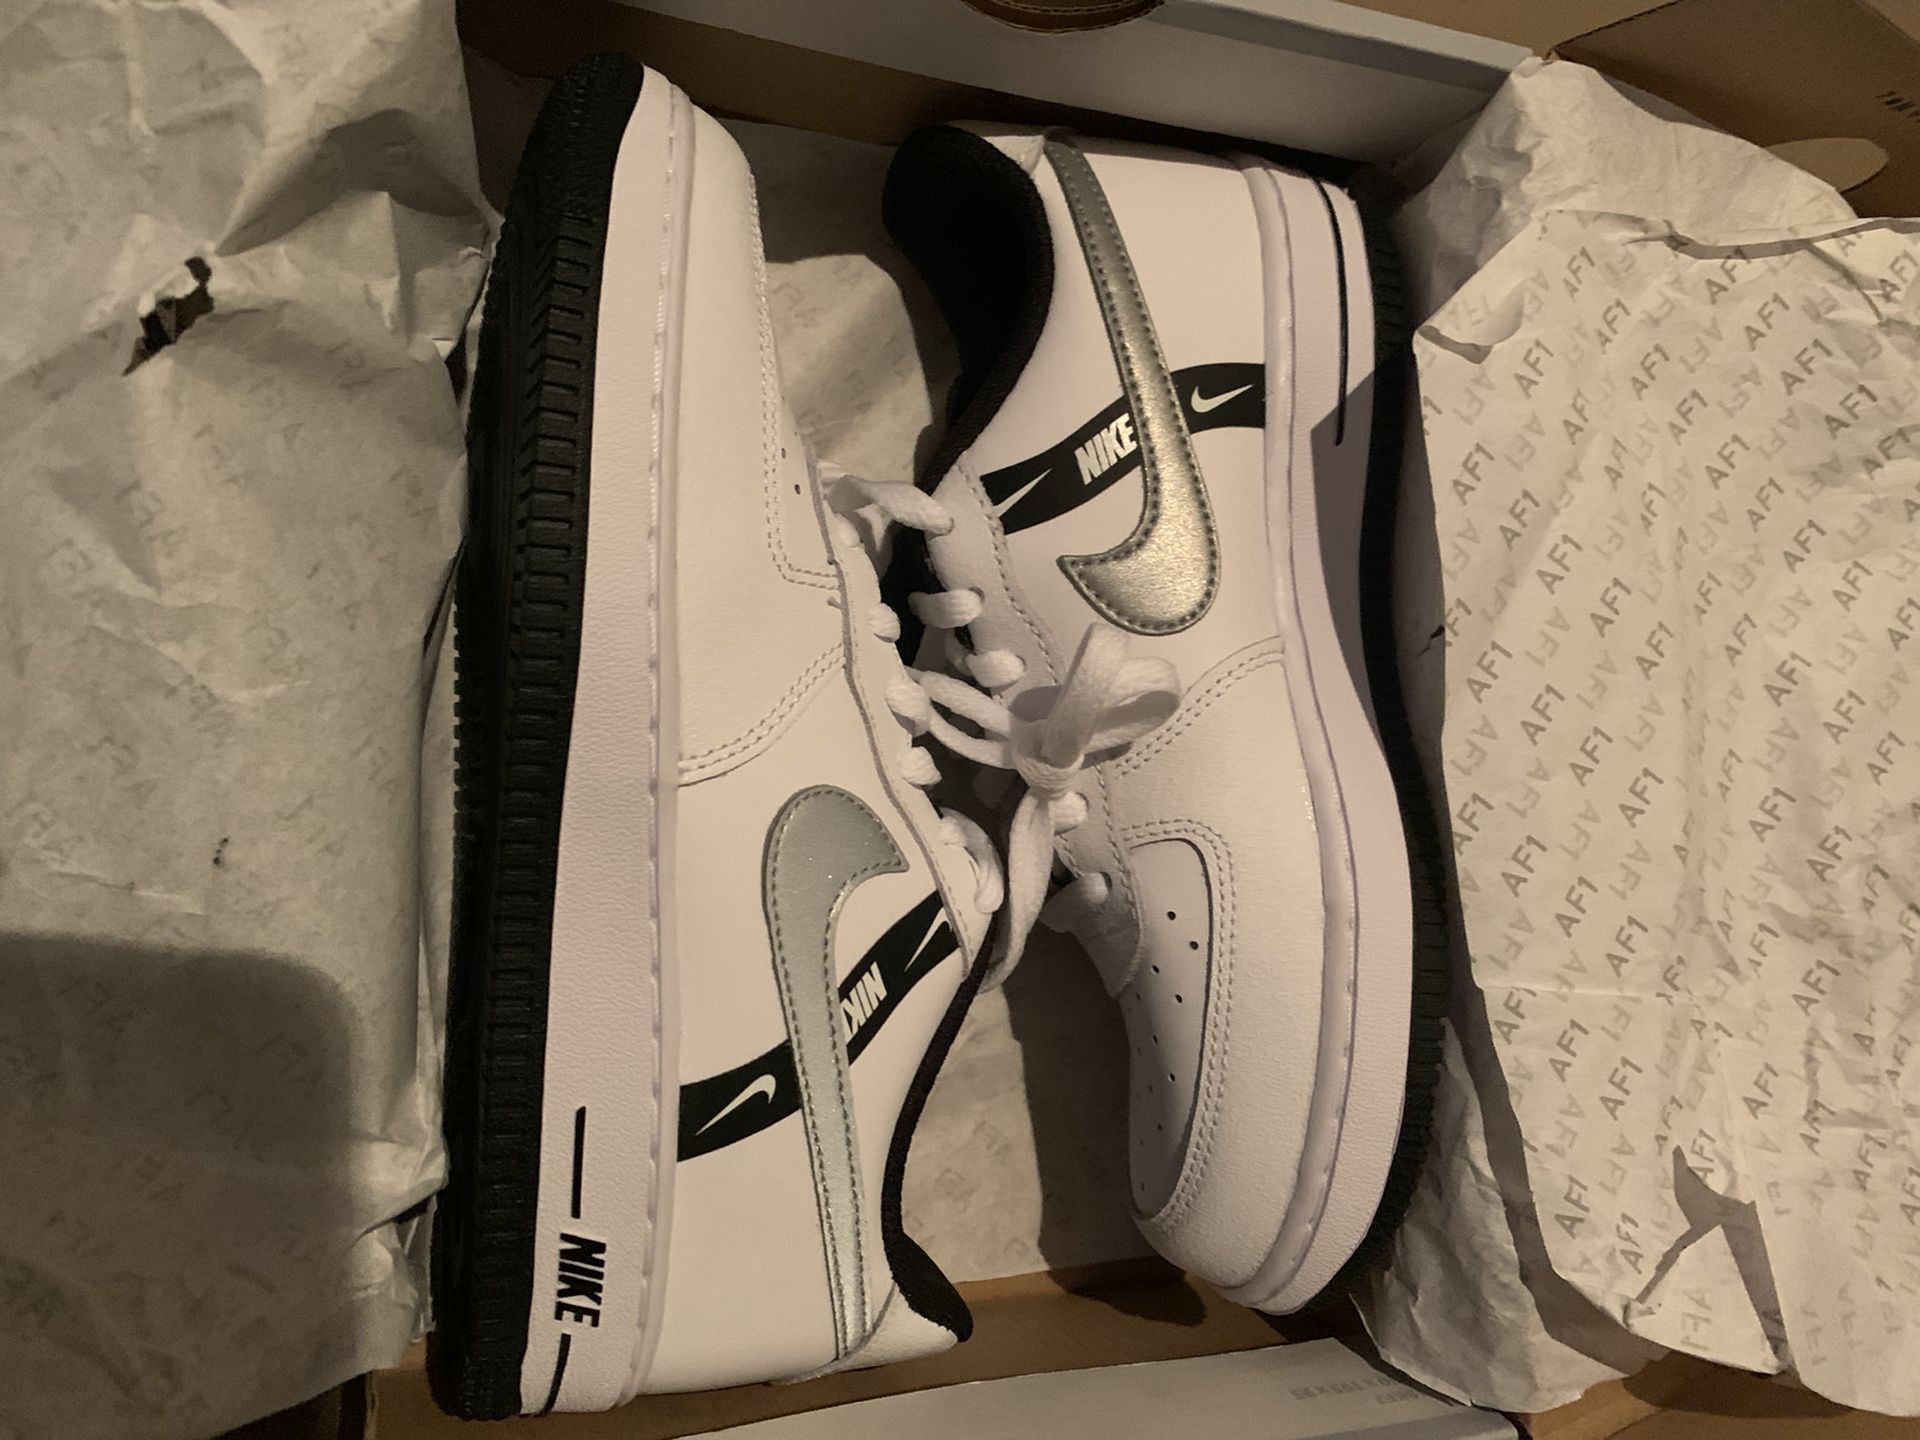 Air Force 1 LV8 KSA Reflective Shoes Size 2.5y Youth for Sale in